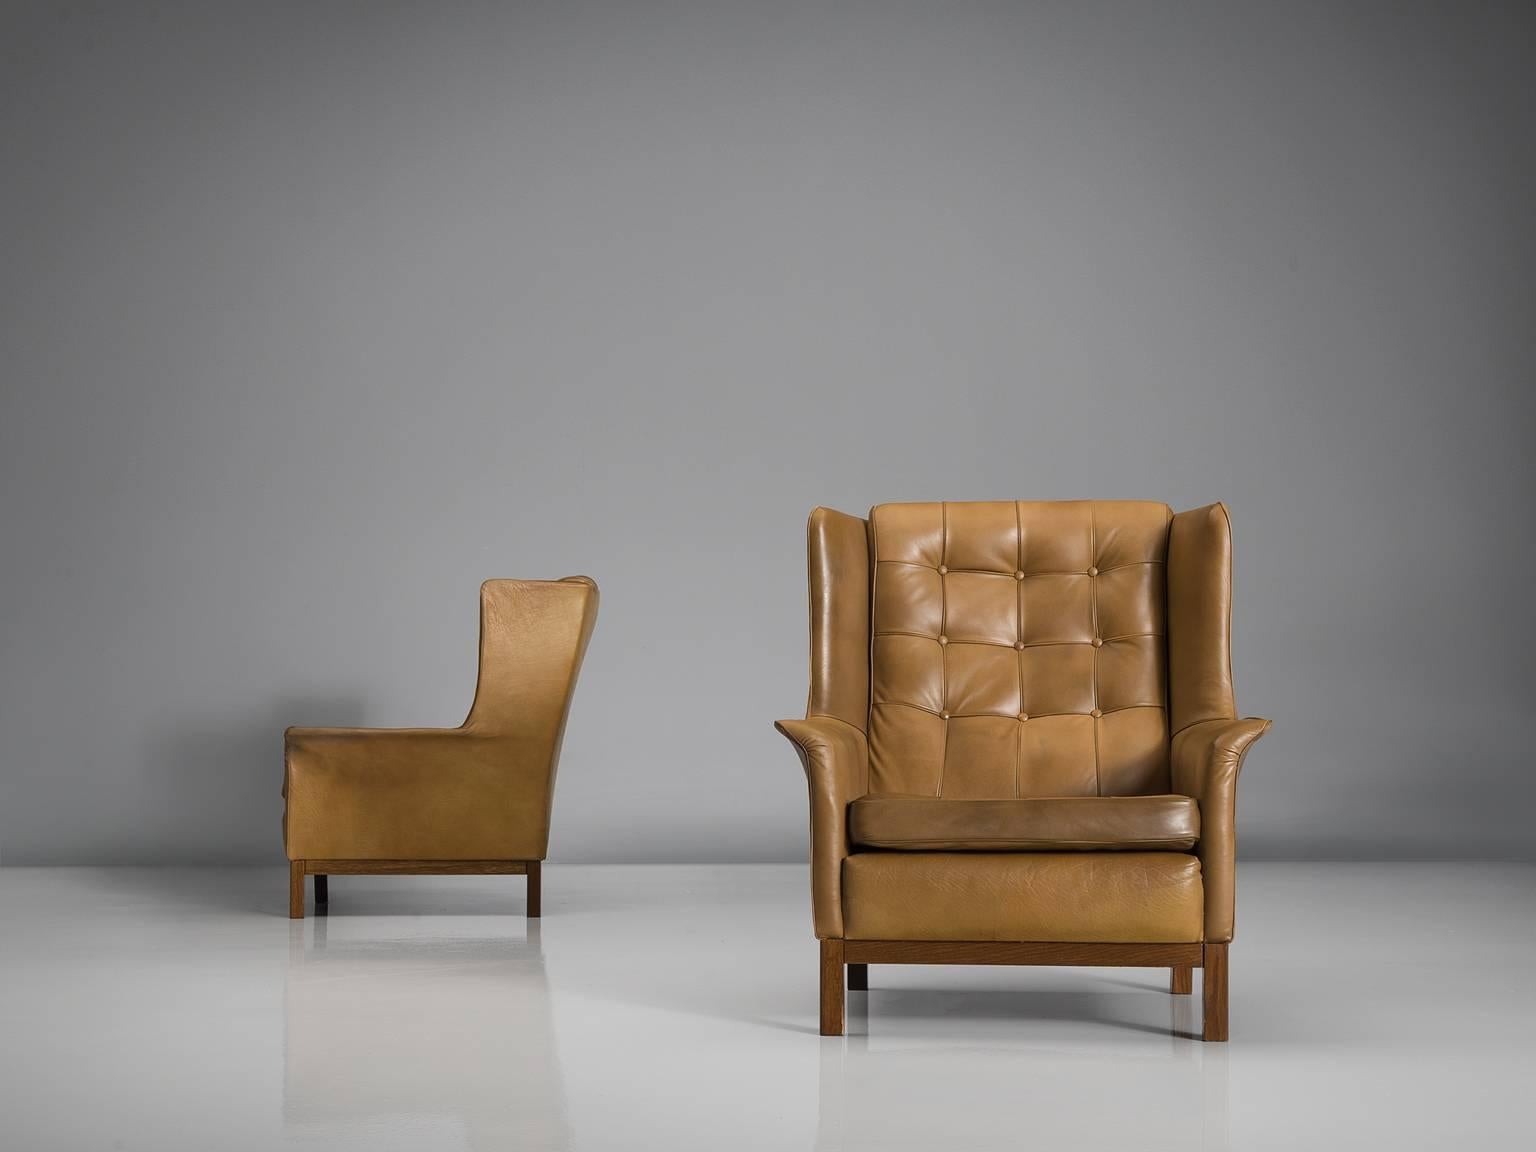 Highback chairs, in leather and wood, by Arne Norell, Sweden, 1960s. 

Wonderful pair of comfortable buffalo leather easy chairs by Swedish designer Arne Norell. These lounge chairs come with a very high standard of comfort, something that Norell